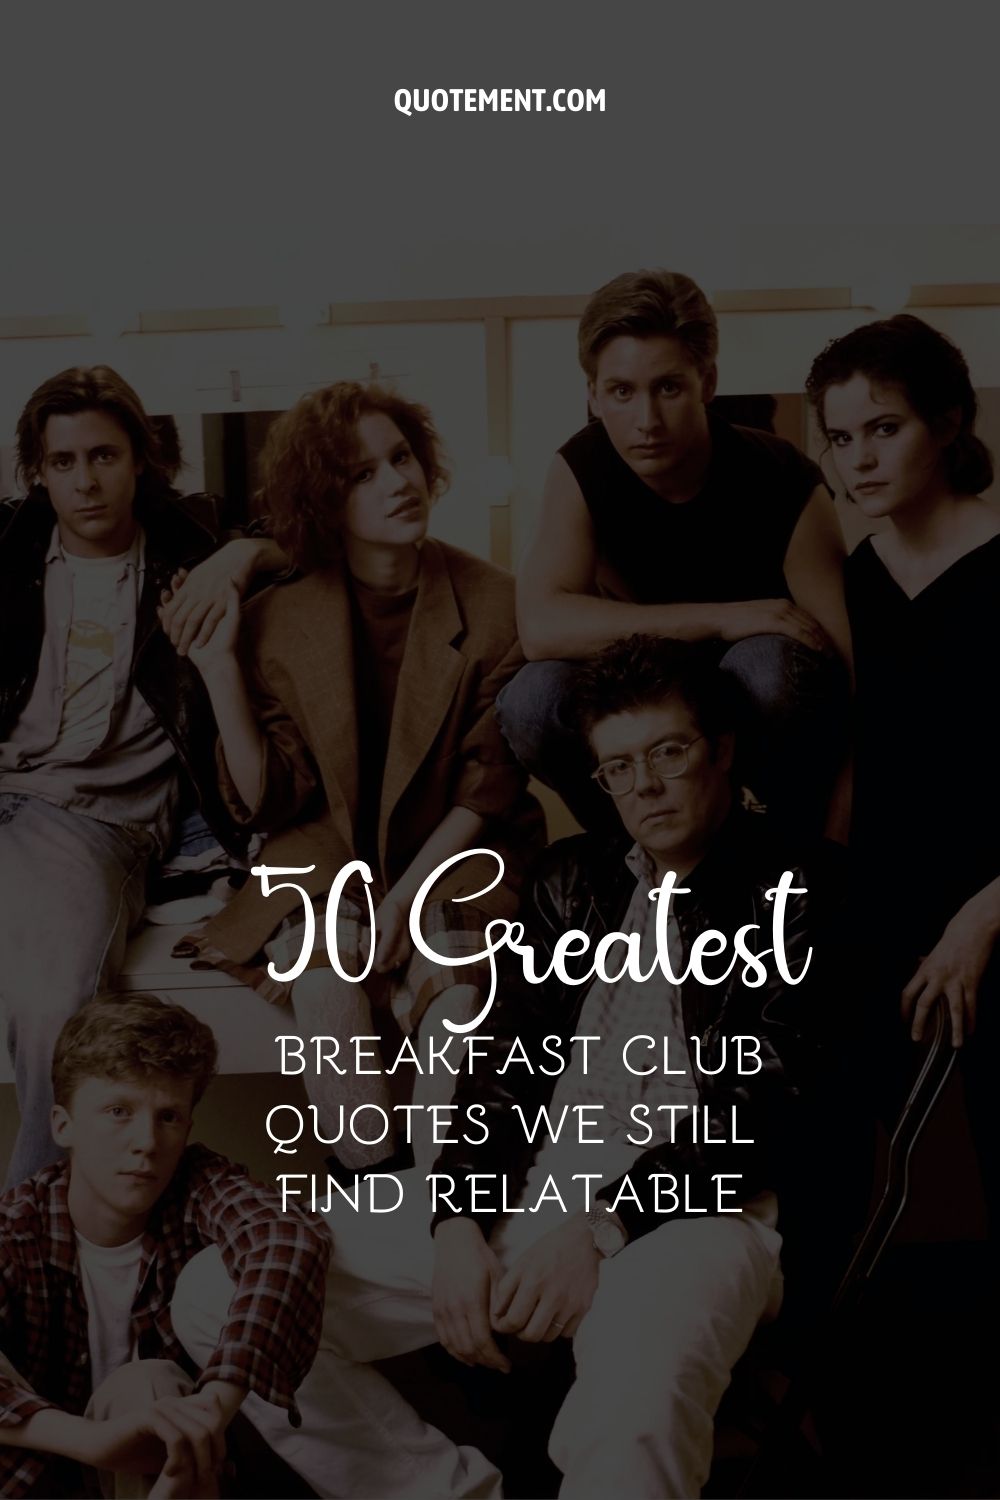 50 Greatest Breakfast Club Quotes We Still Find Relatable
